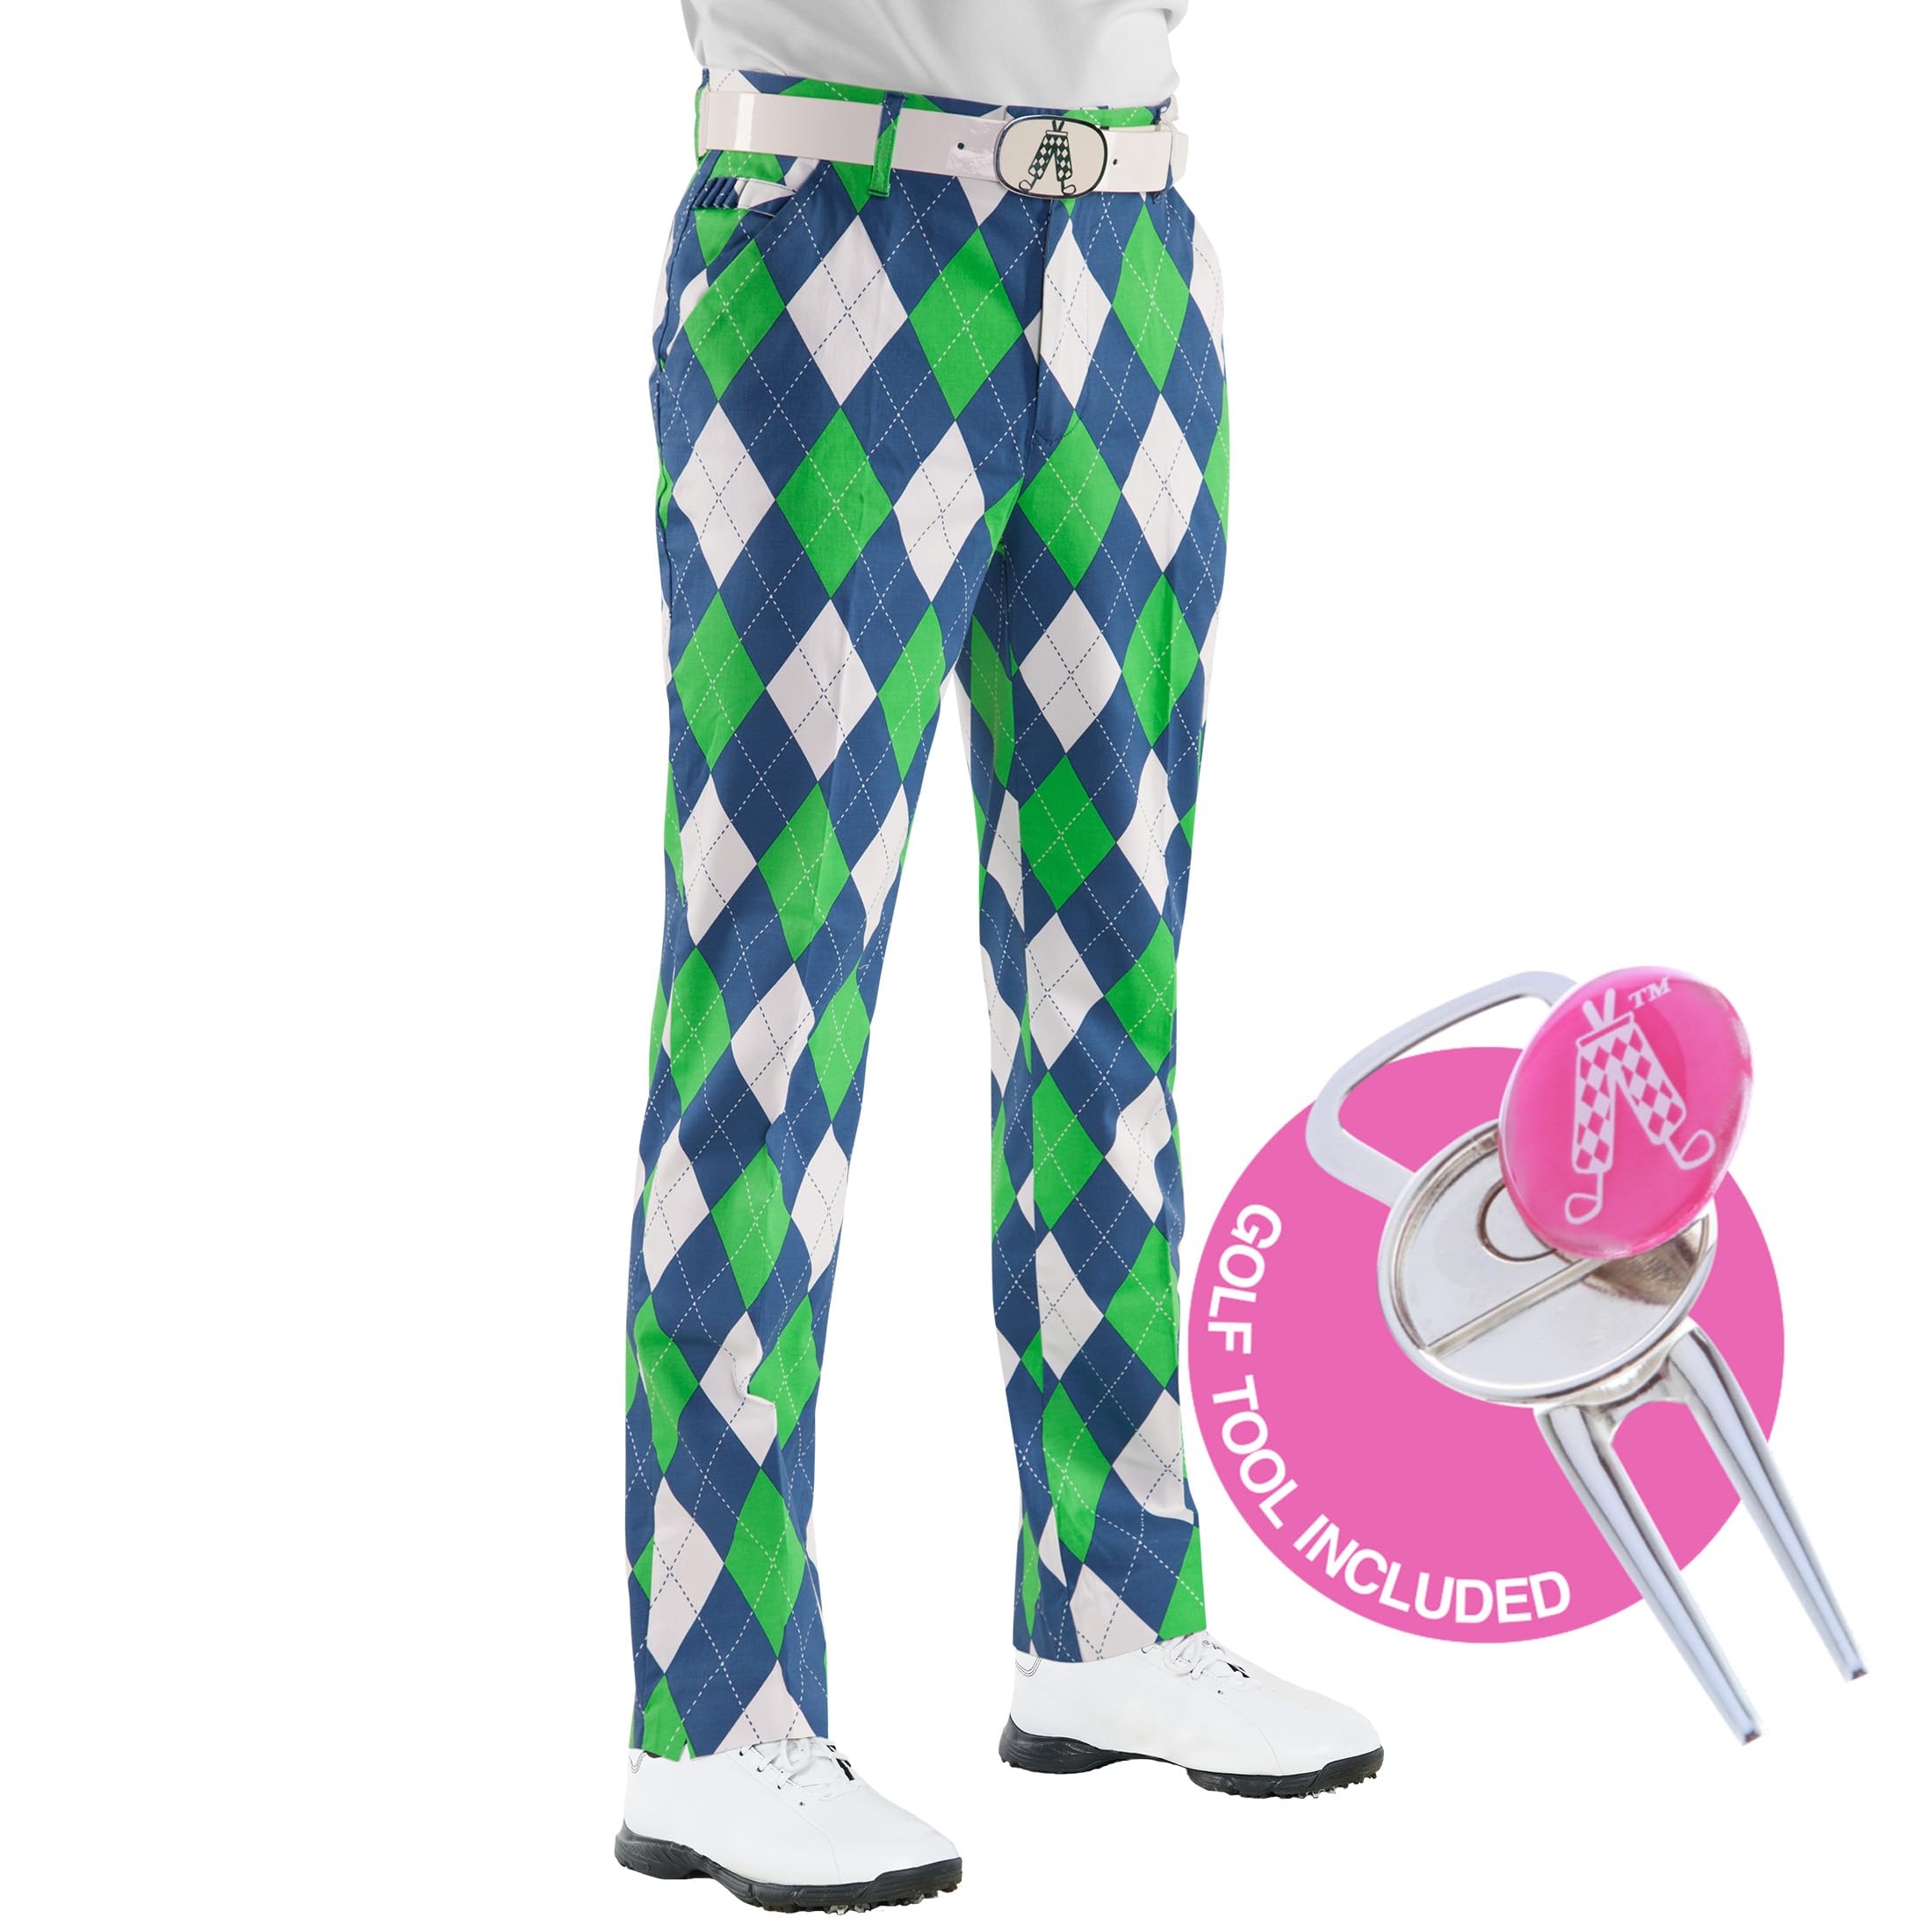 ROYAL & AWESOME HERREN-GOLFHOSE, Mehrfarbig (Blues on the Green), W34/L32